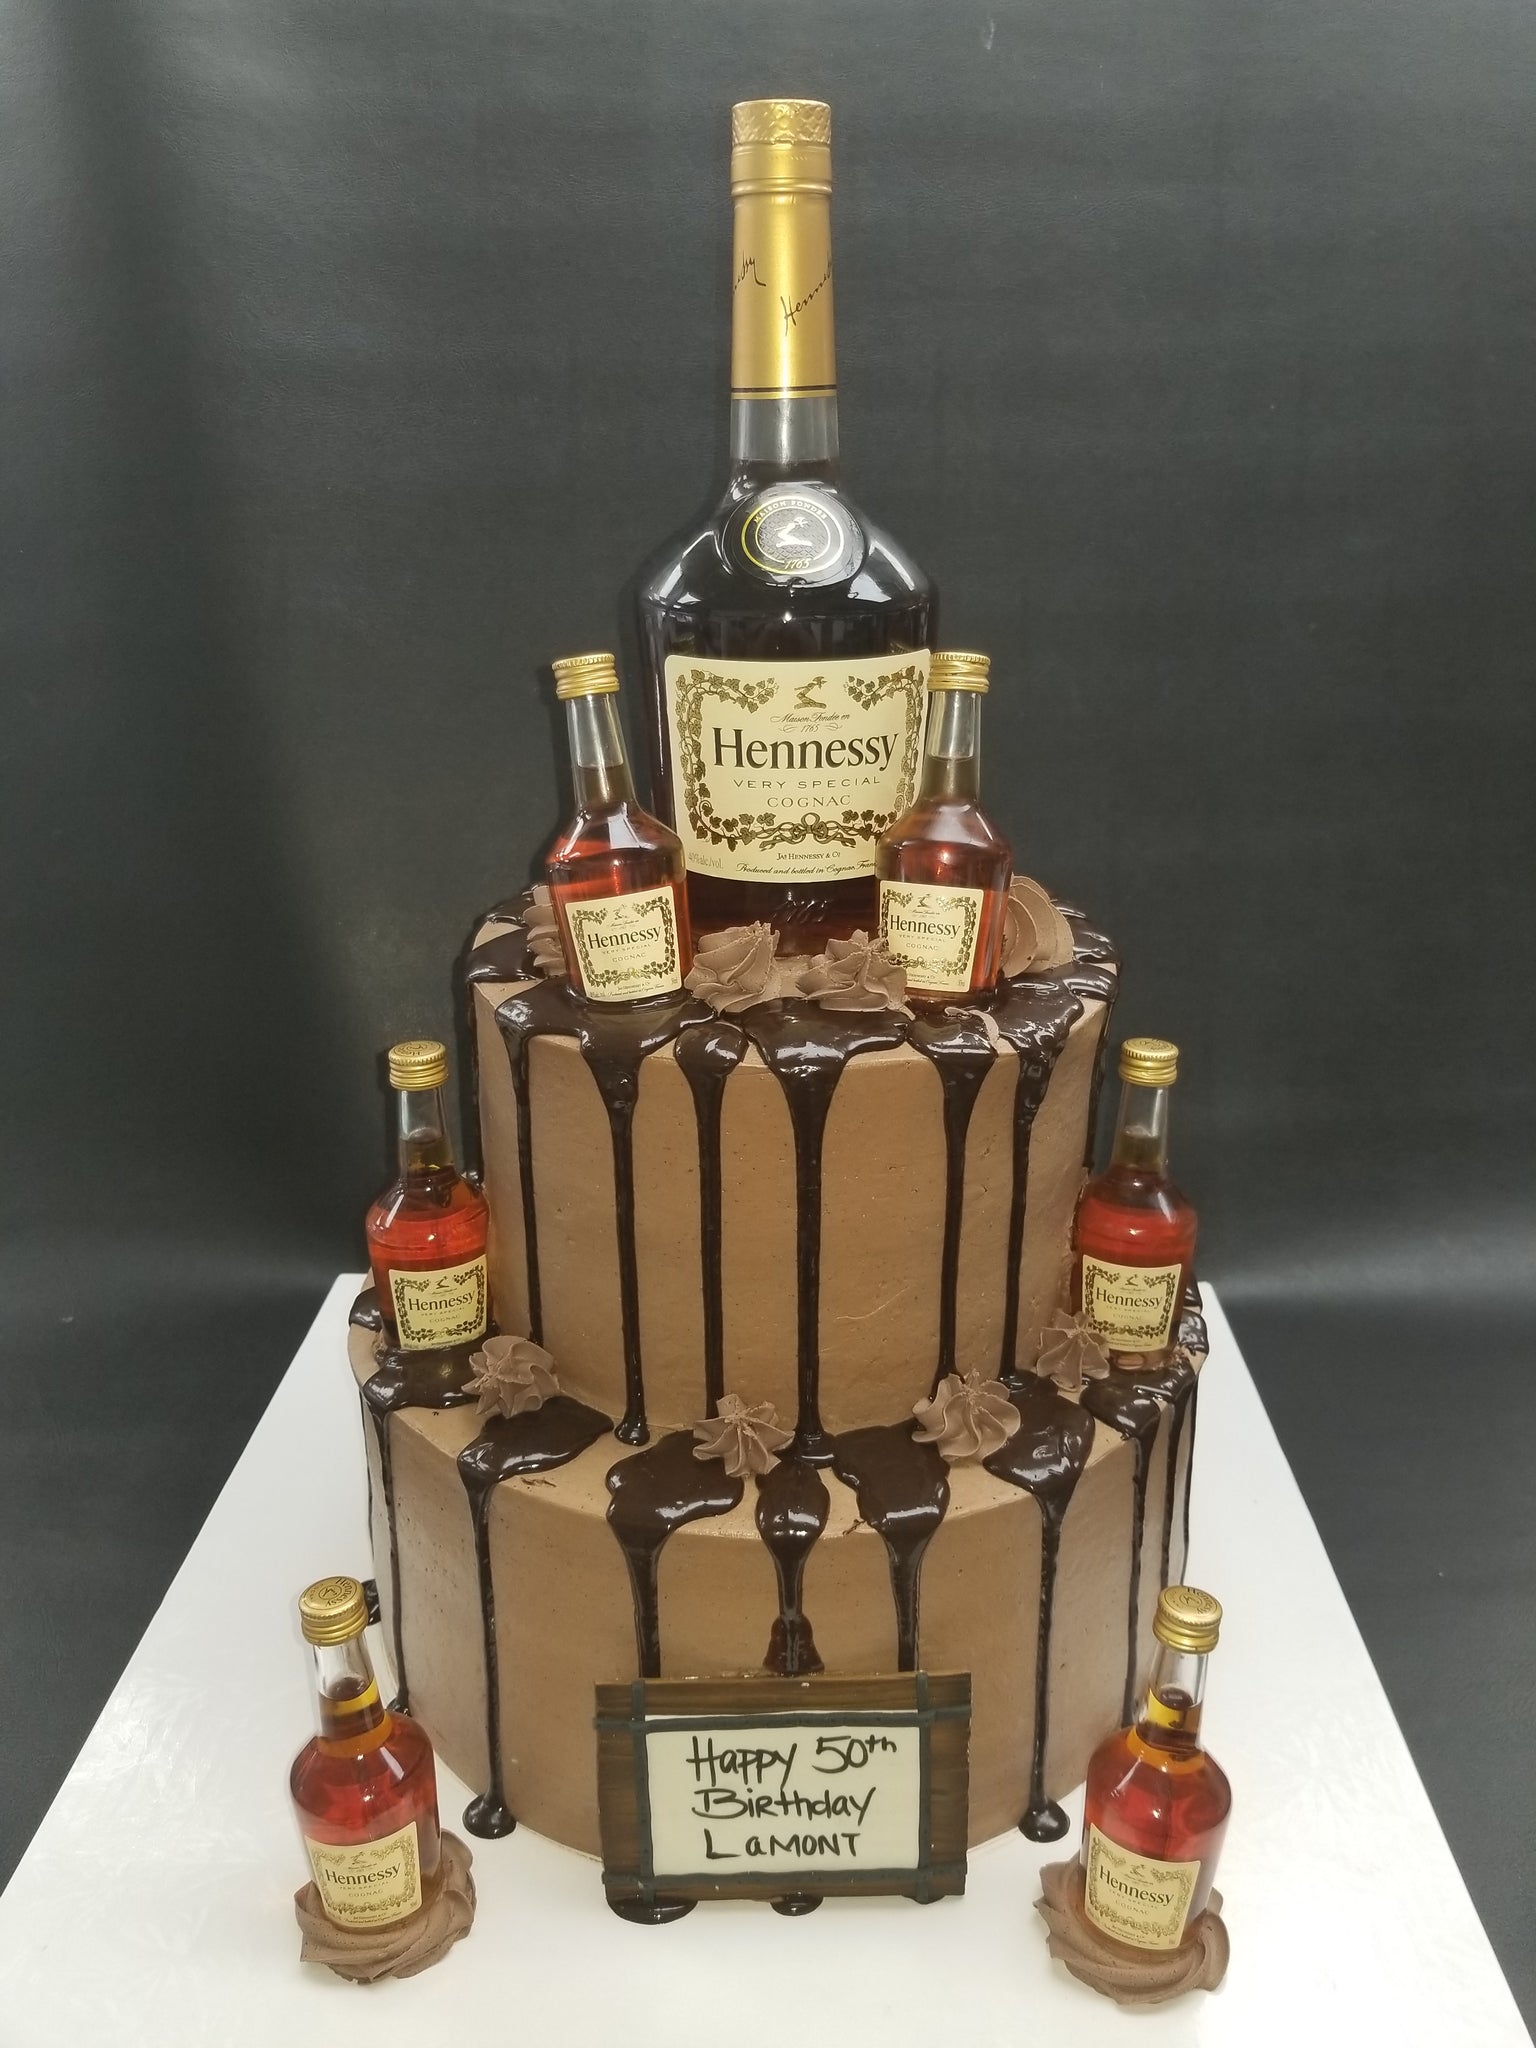 Hennessy cake. Feed 15 people. – Chefjhoanes